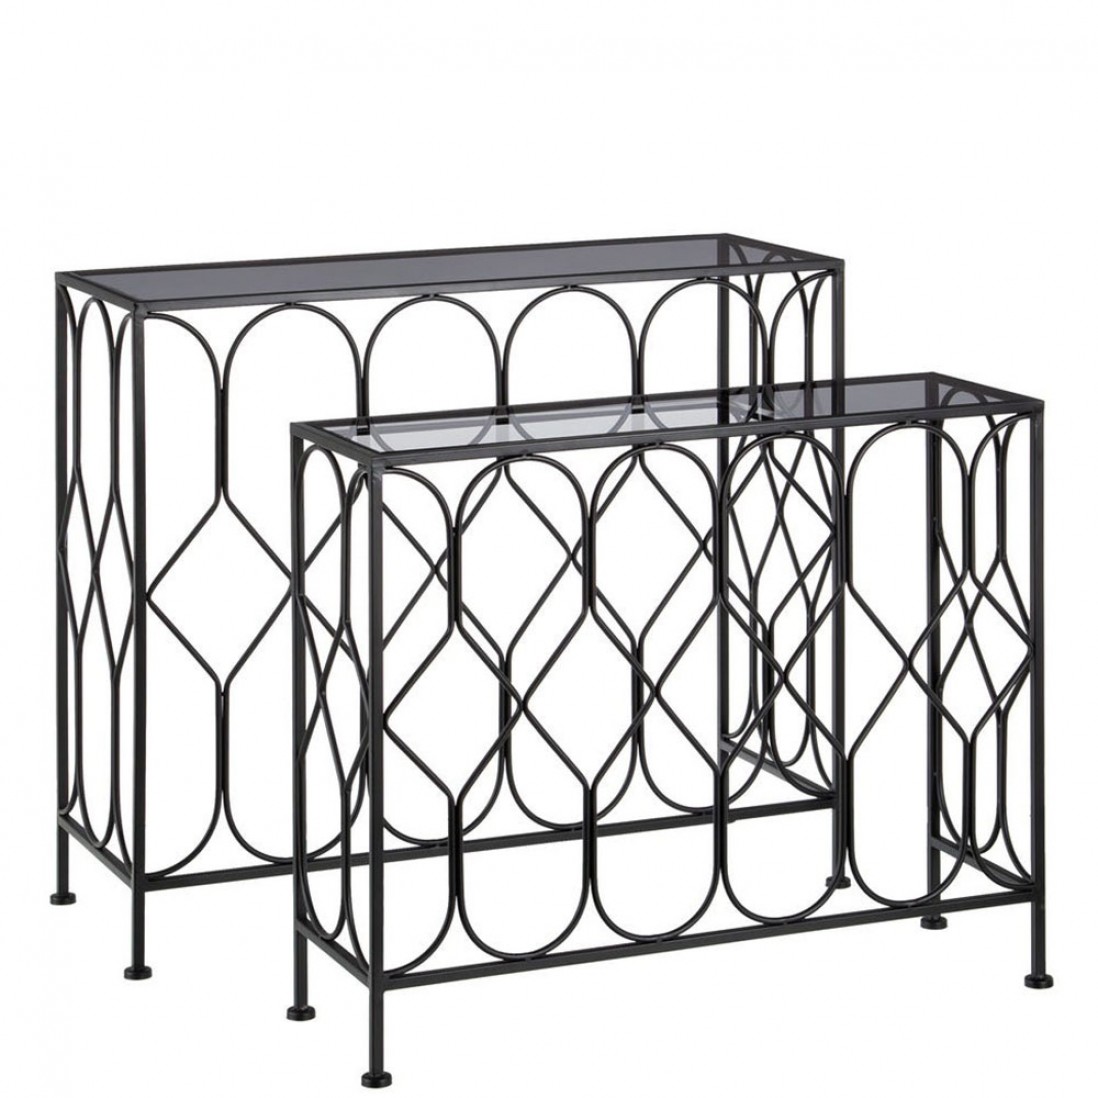 METAL/GLASS CONSOLE 577